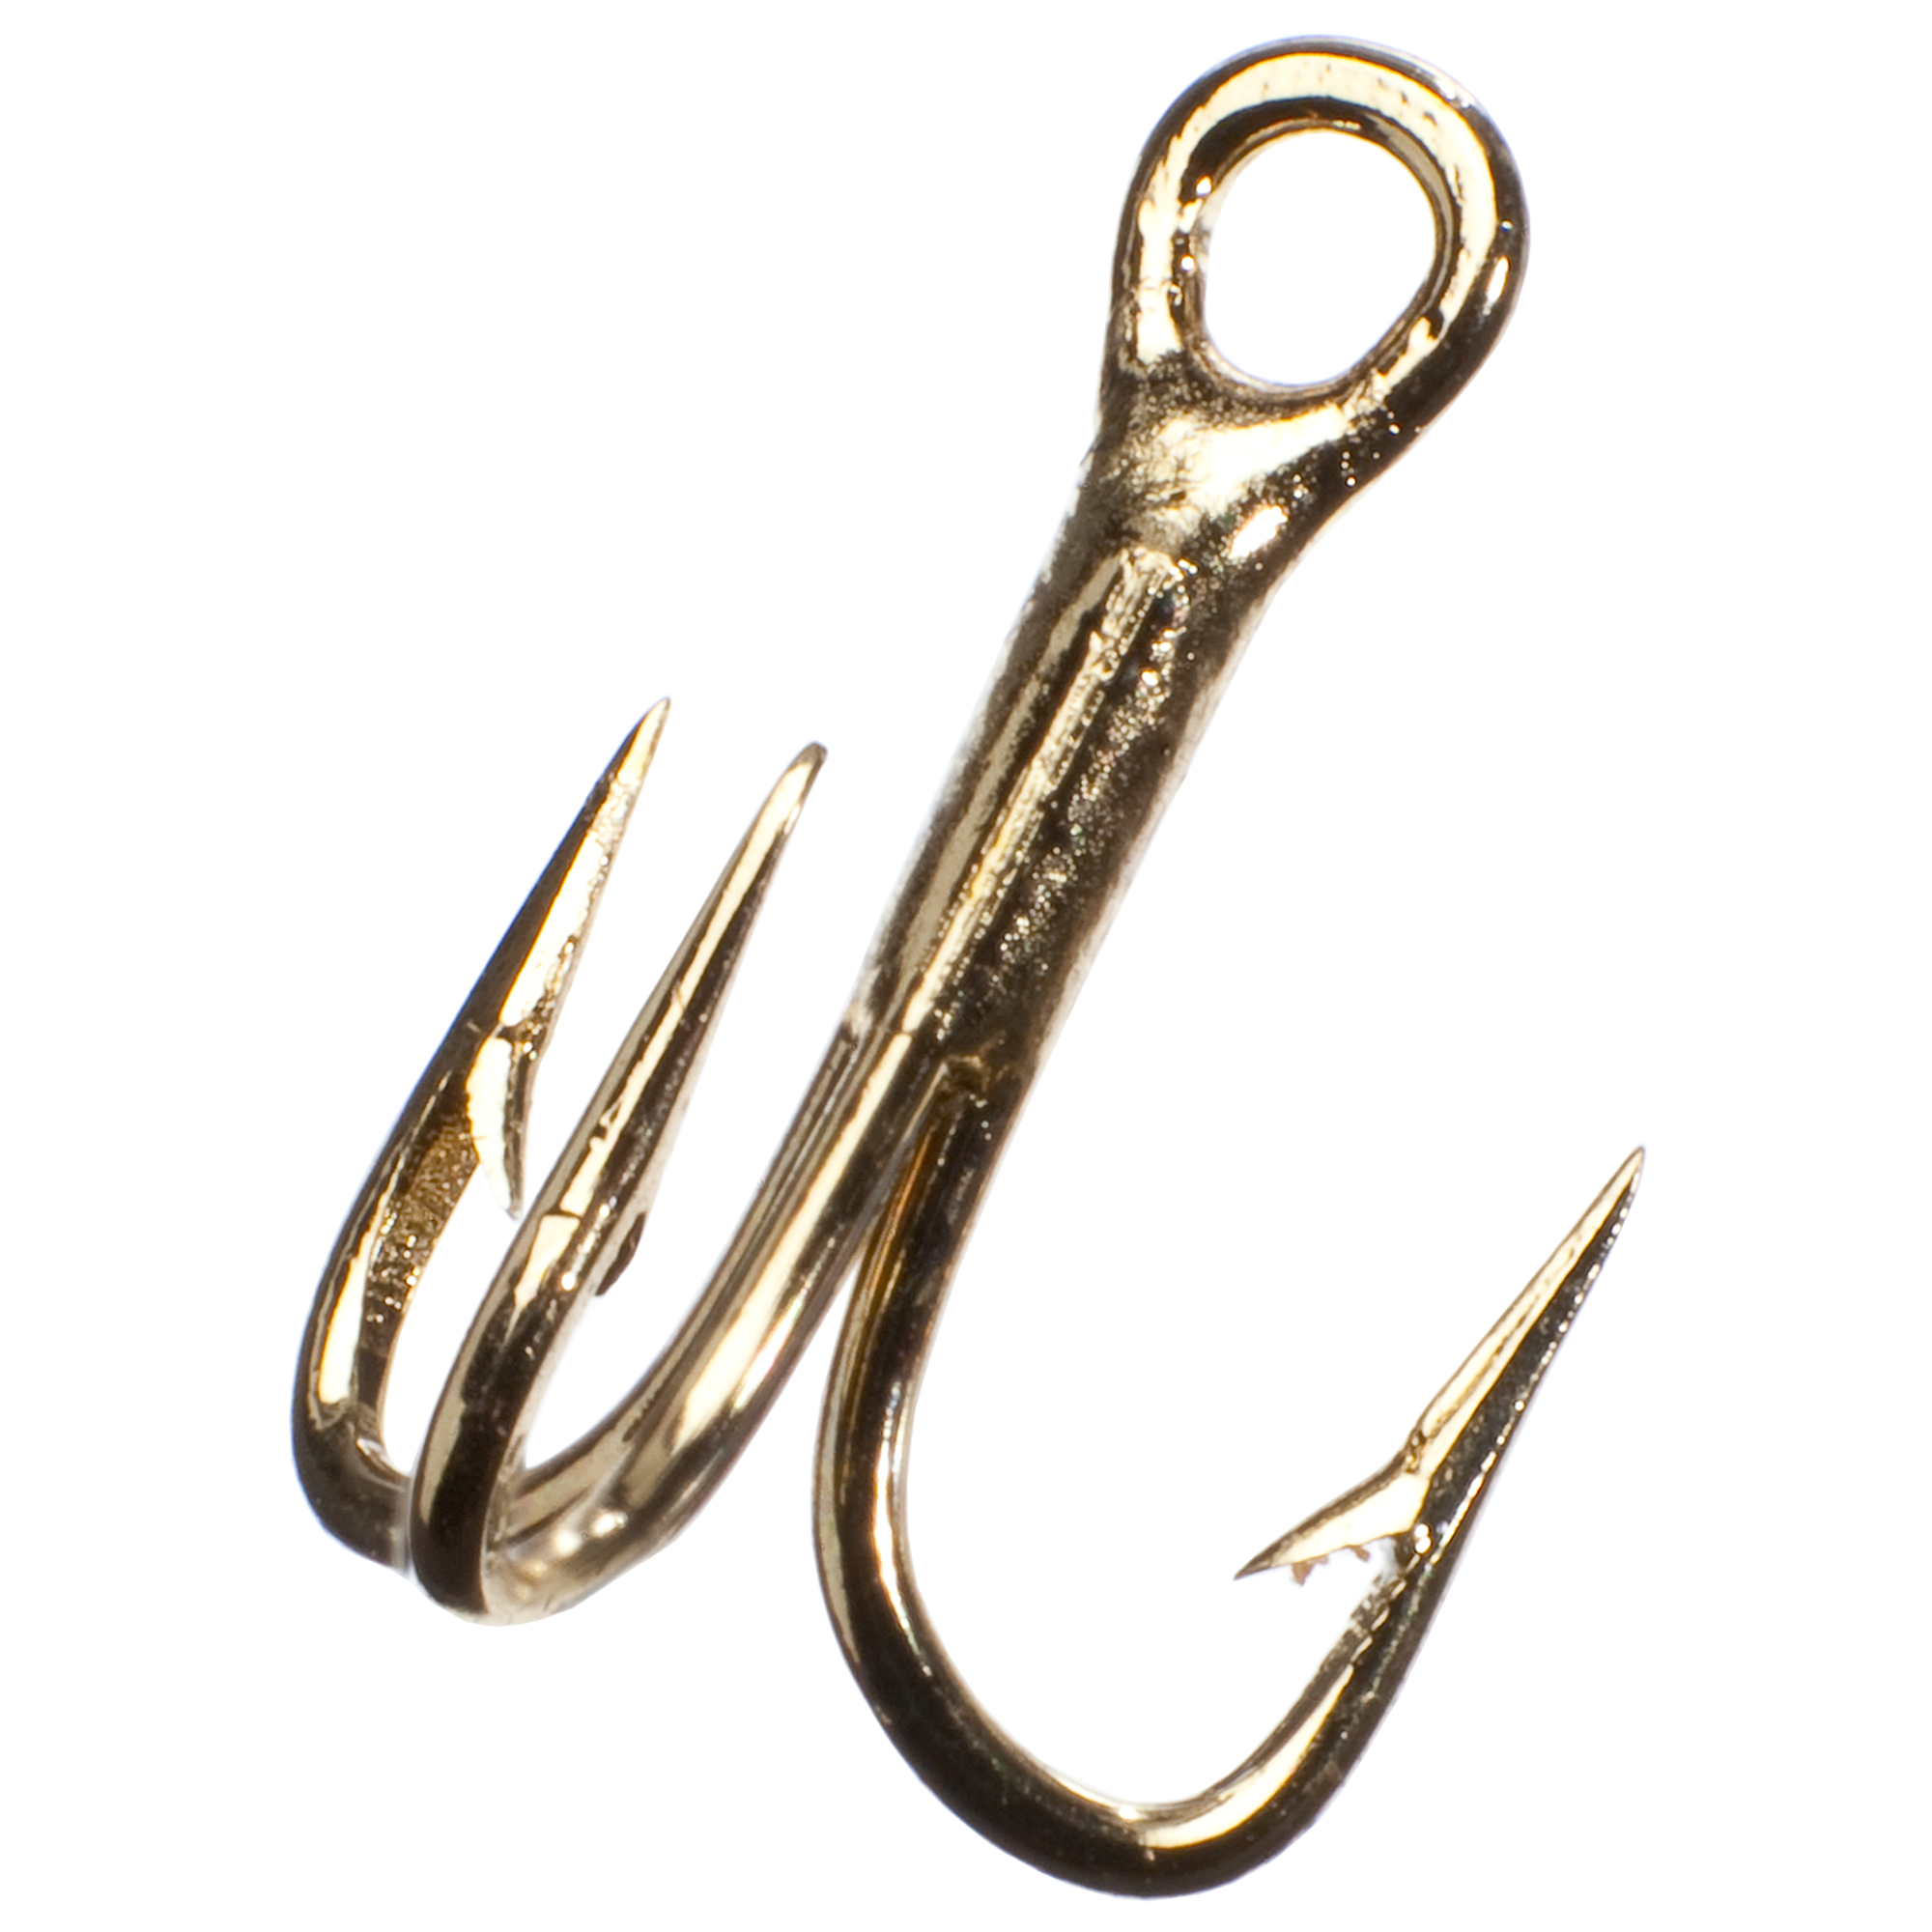 Eagle Claw 2X Treble Hooks - Gold - #10 - 5 Pack